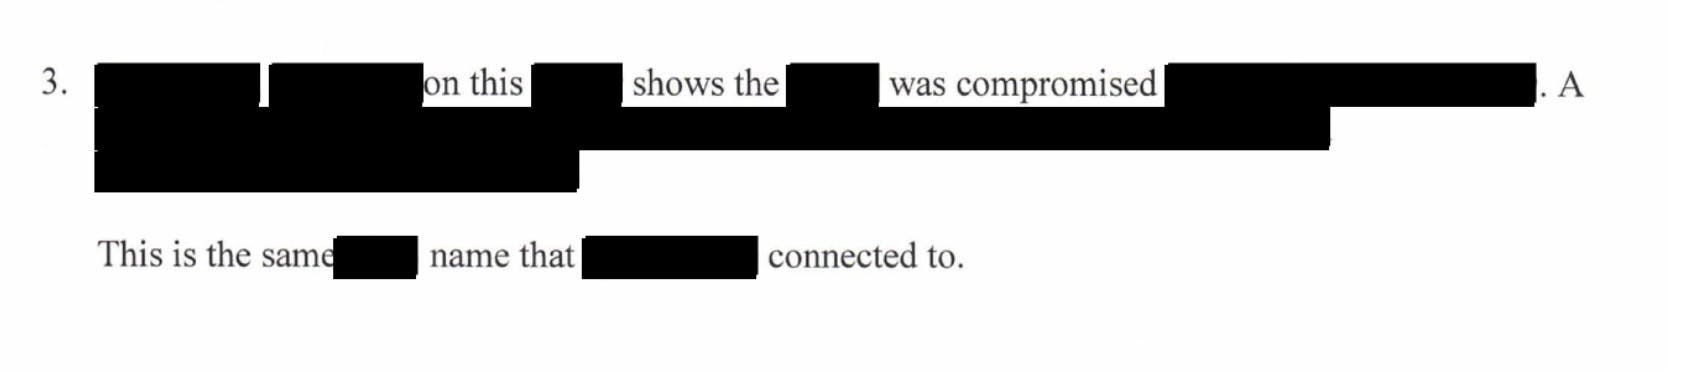 redacted ransomware records